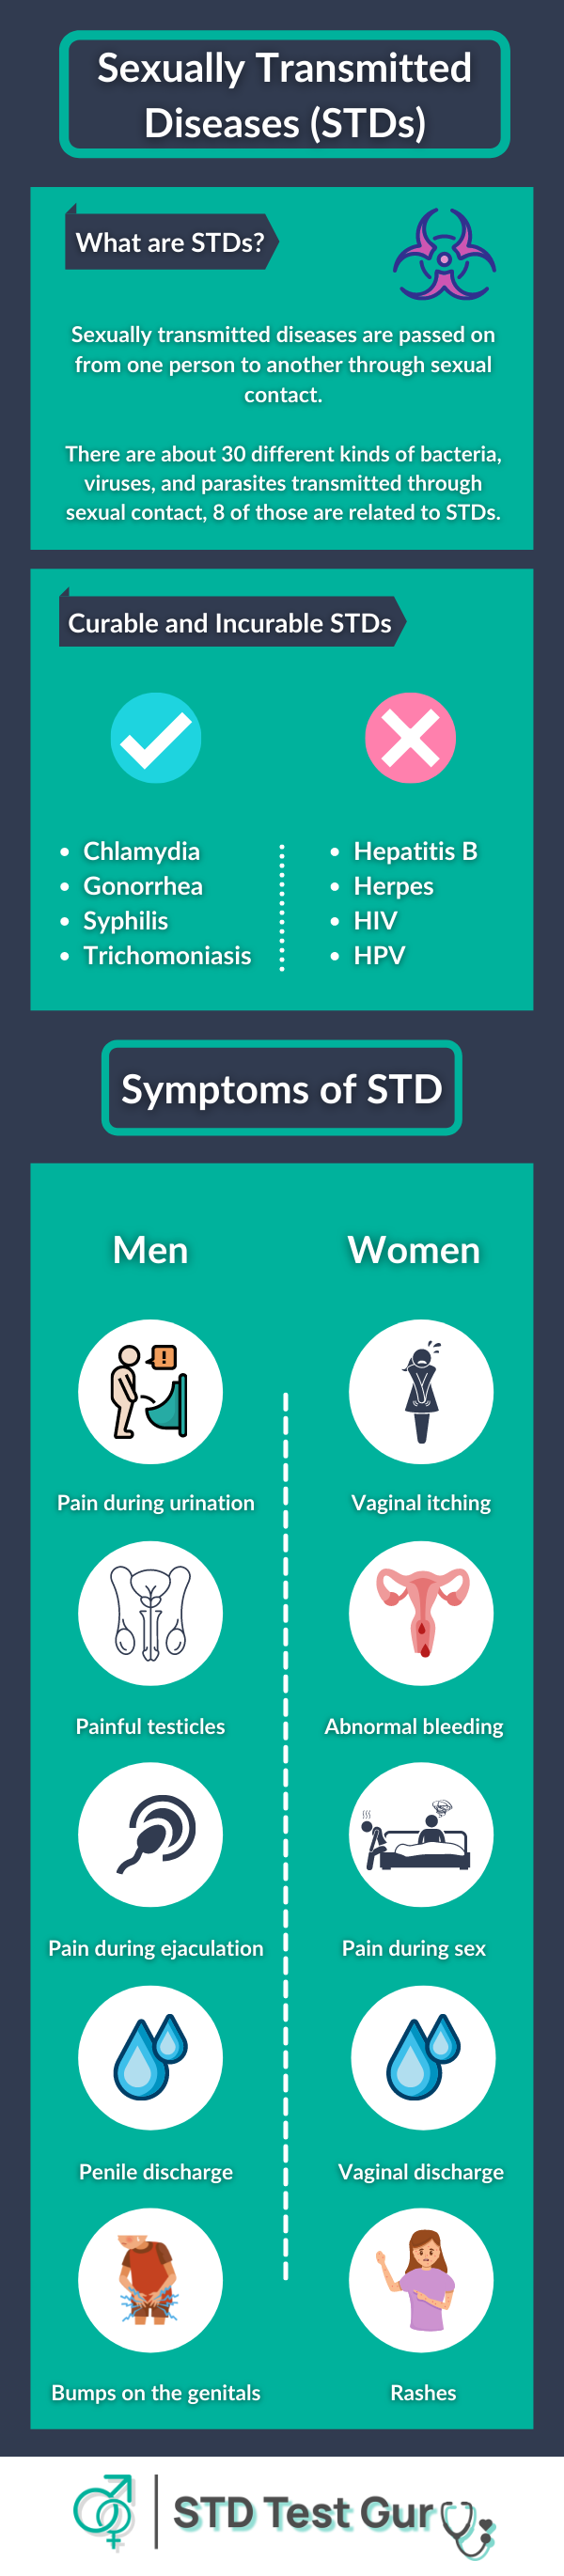 Types of STDs and their symptoms